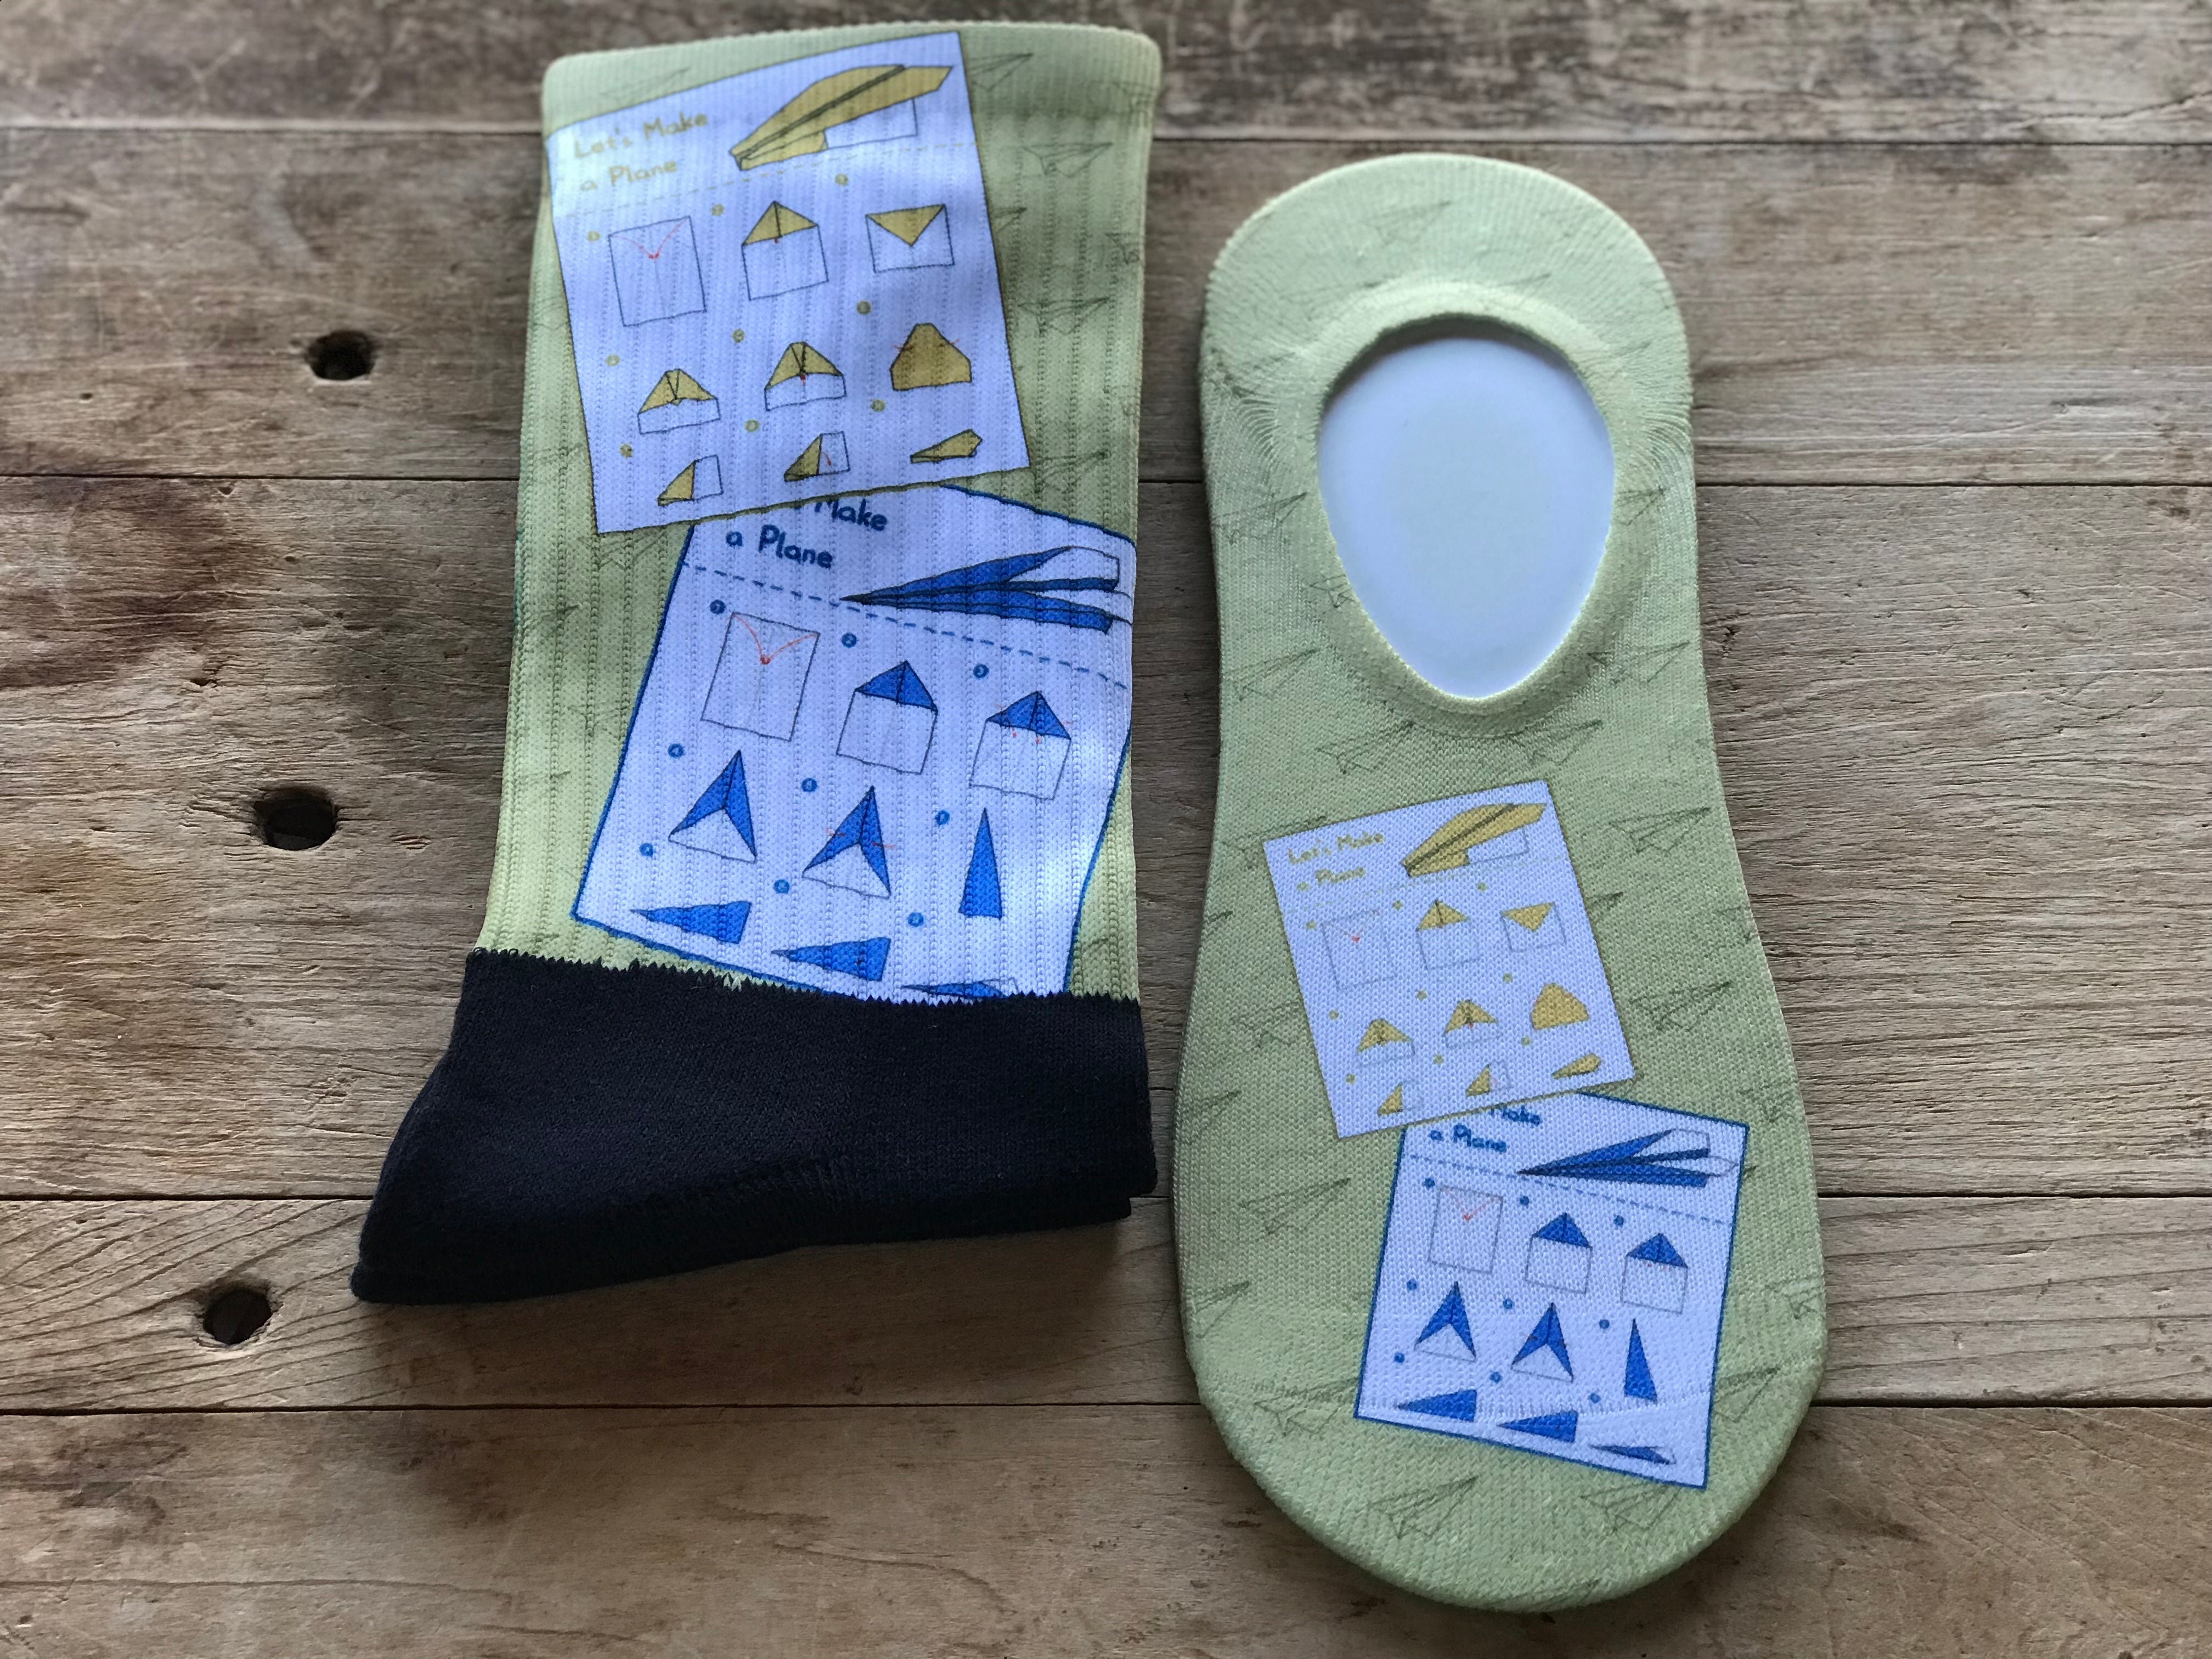 Let’s Make a Plane His & Hers Socks